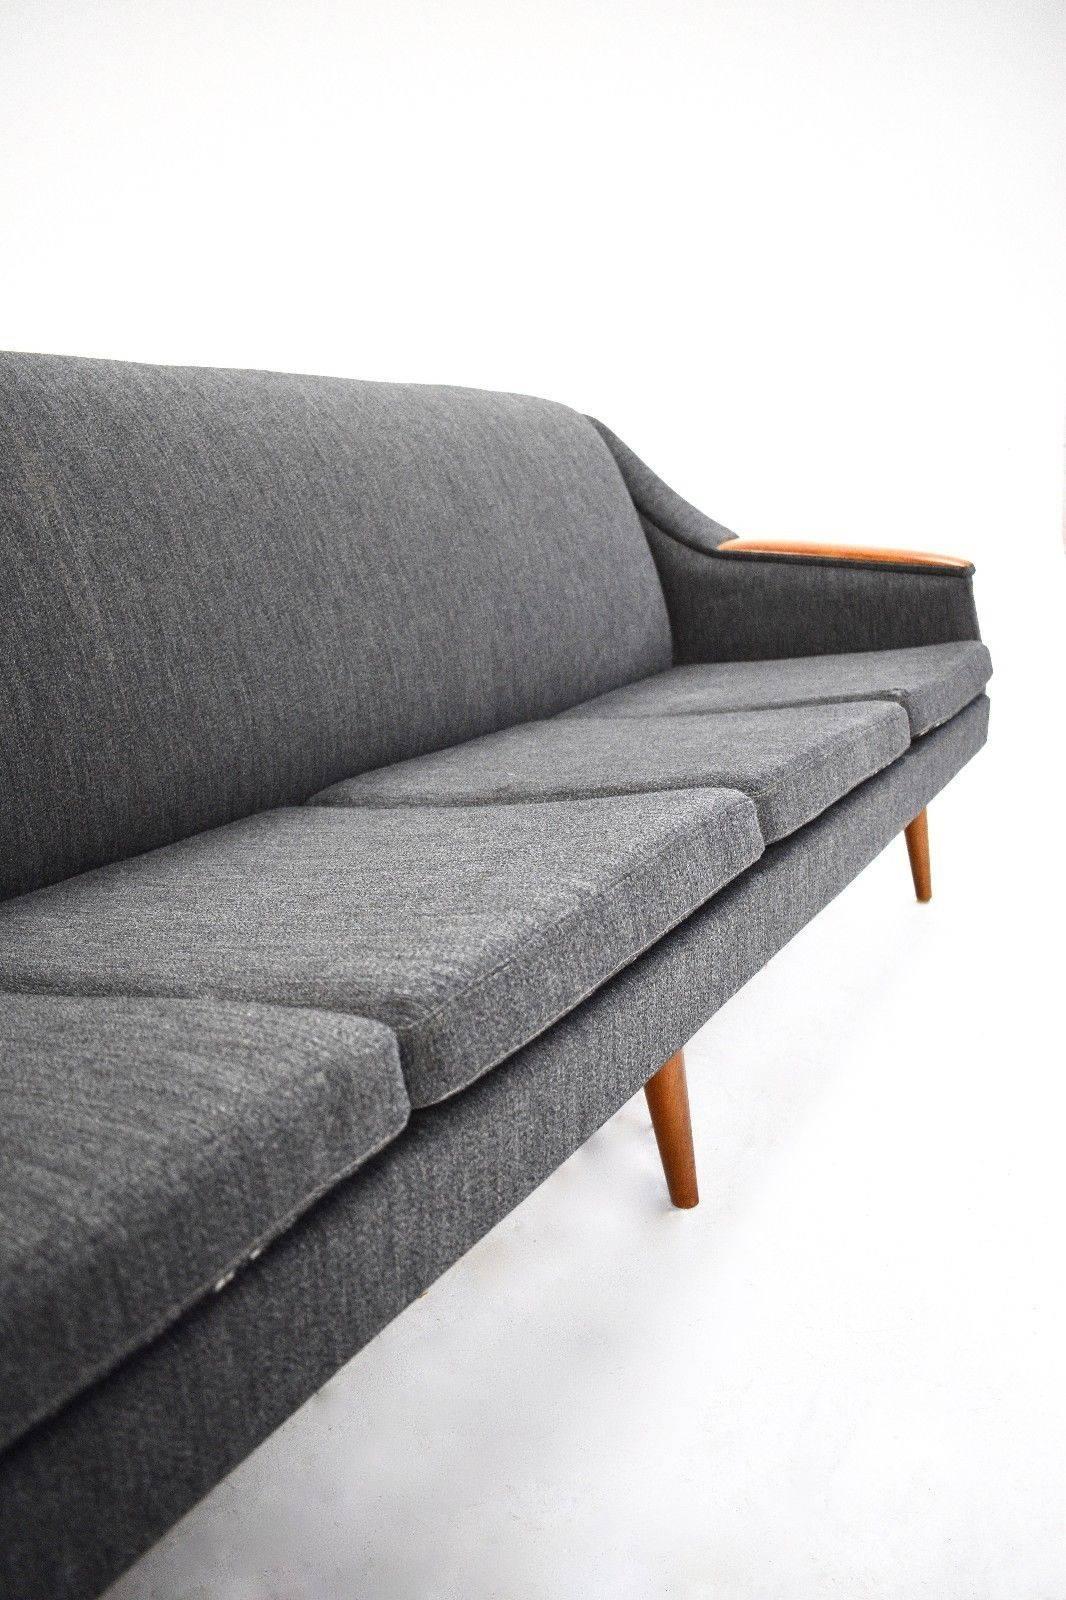 Norwegian Charcoal Grey Wool and Teak Four-Seat Sofa Midcentury, 1960s In Good Condition For Sale In London, GB